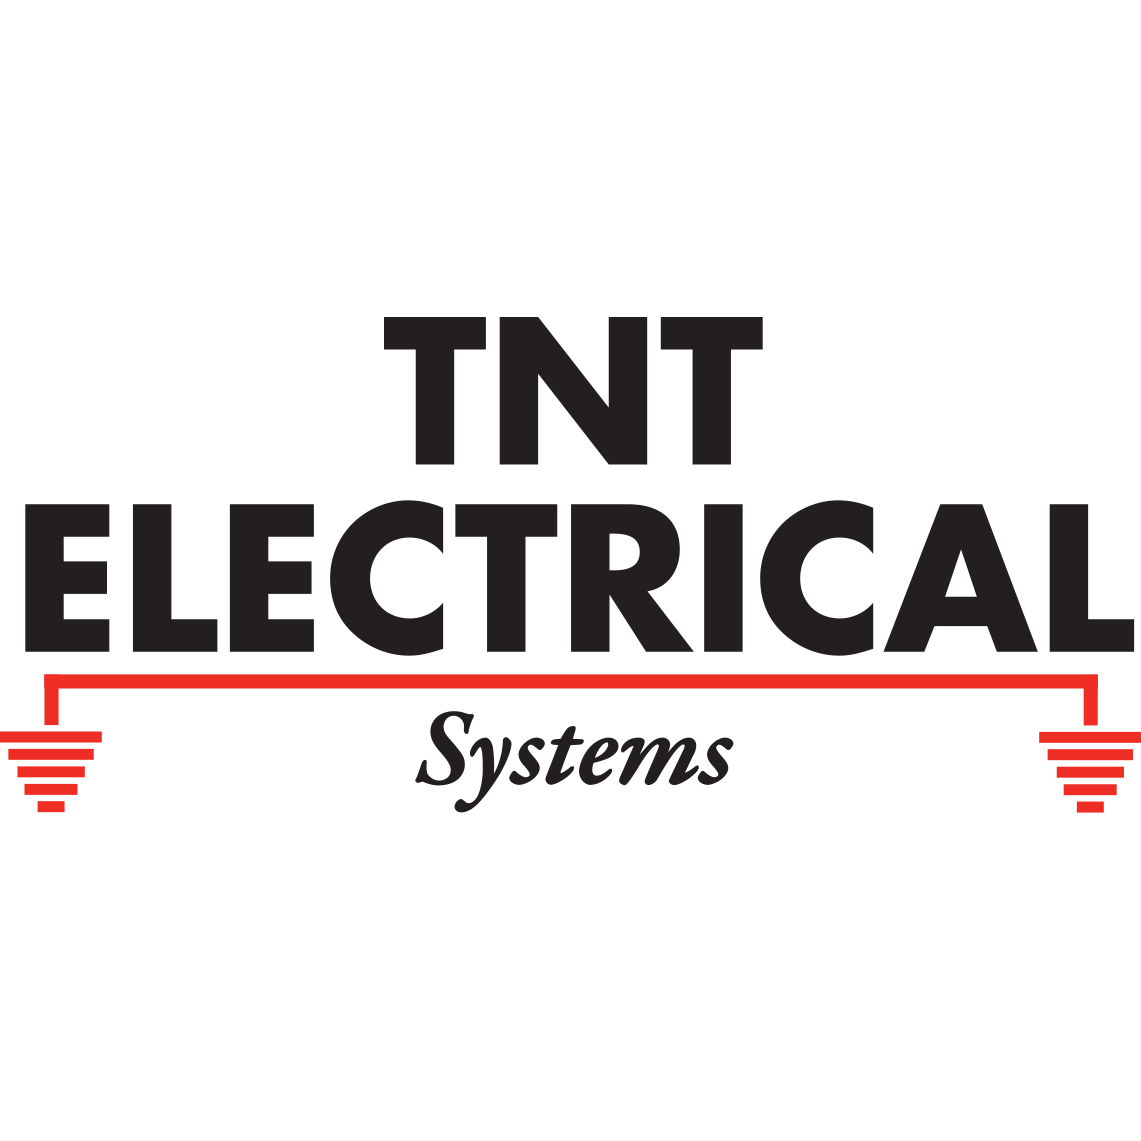 TNT Electrical Systems